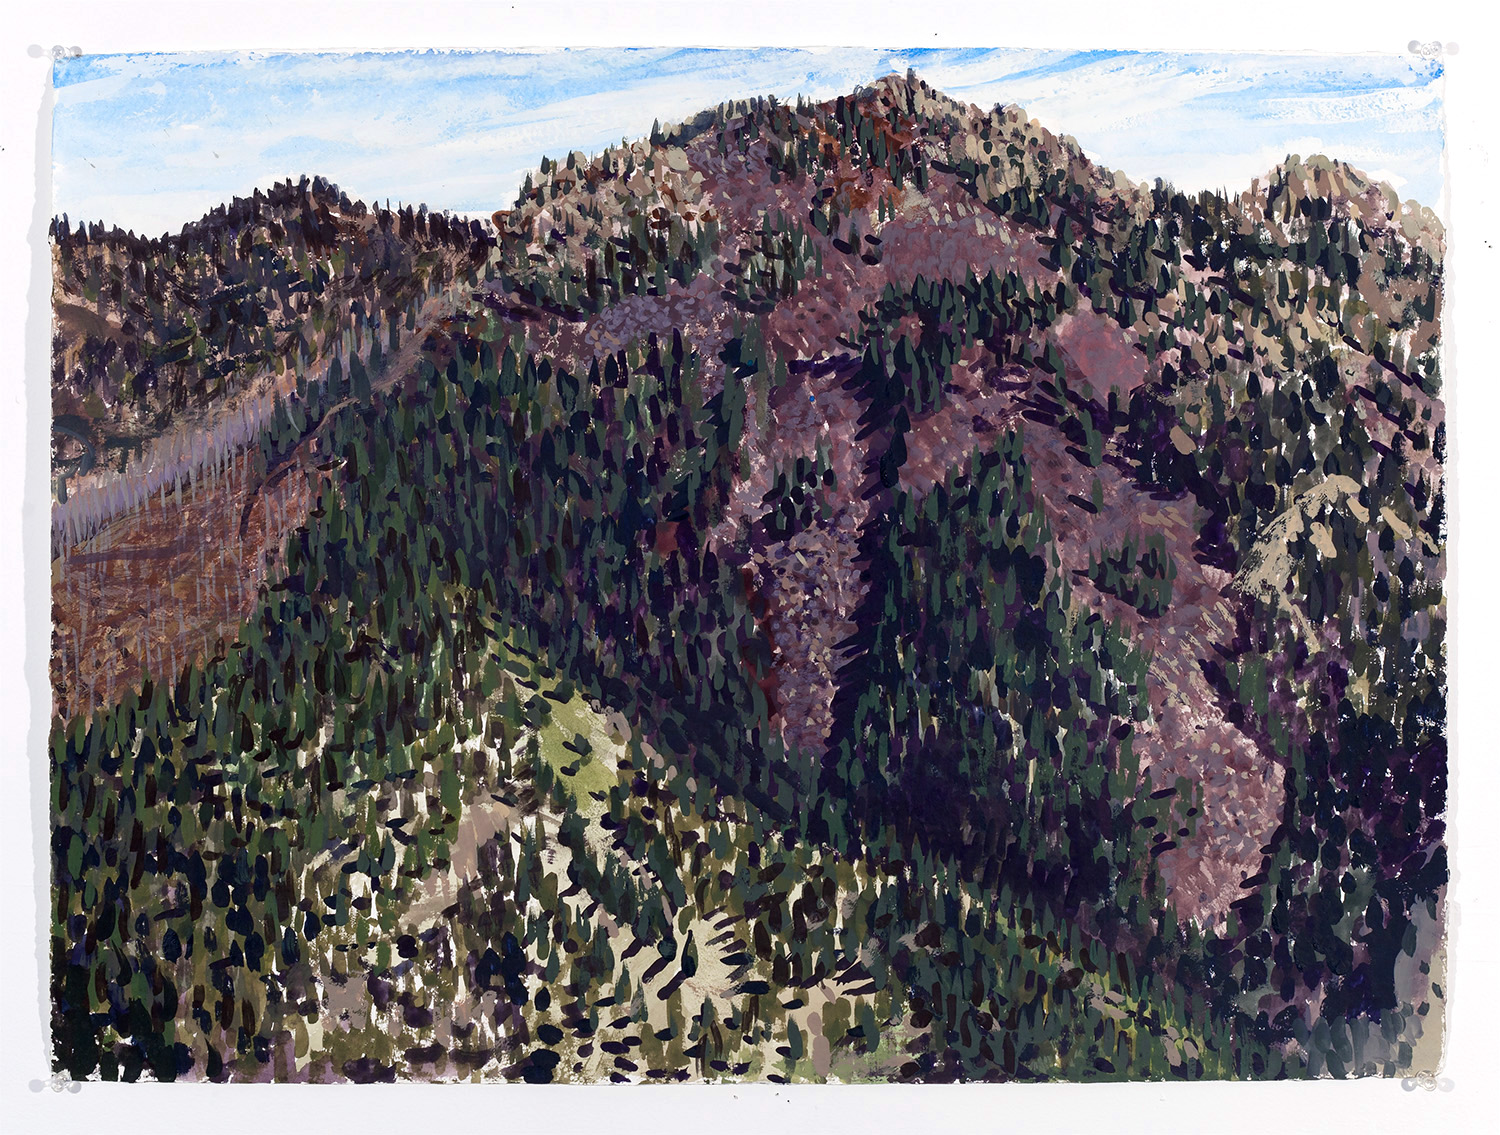  Bear Peak no. 5 (right half), 2017, watercolor and gouache on paper, 22 x 30 inches 